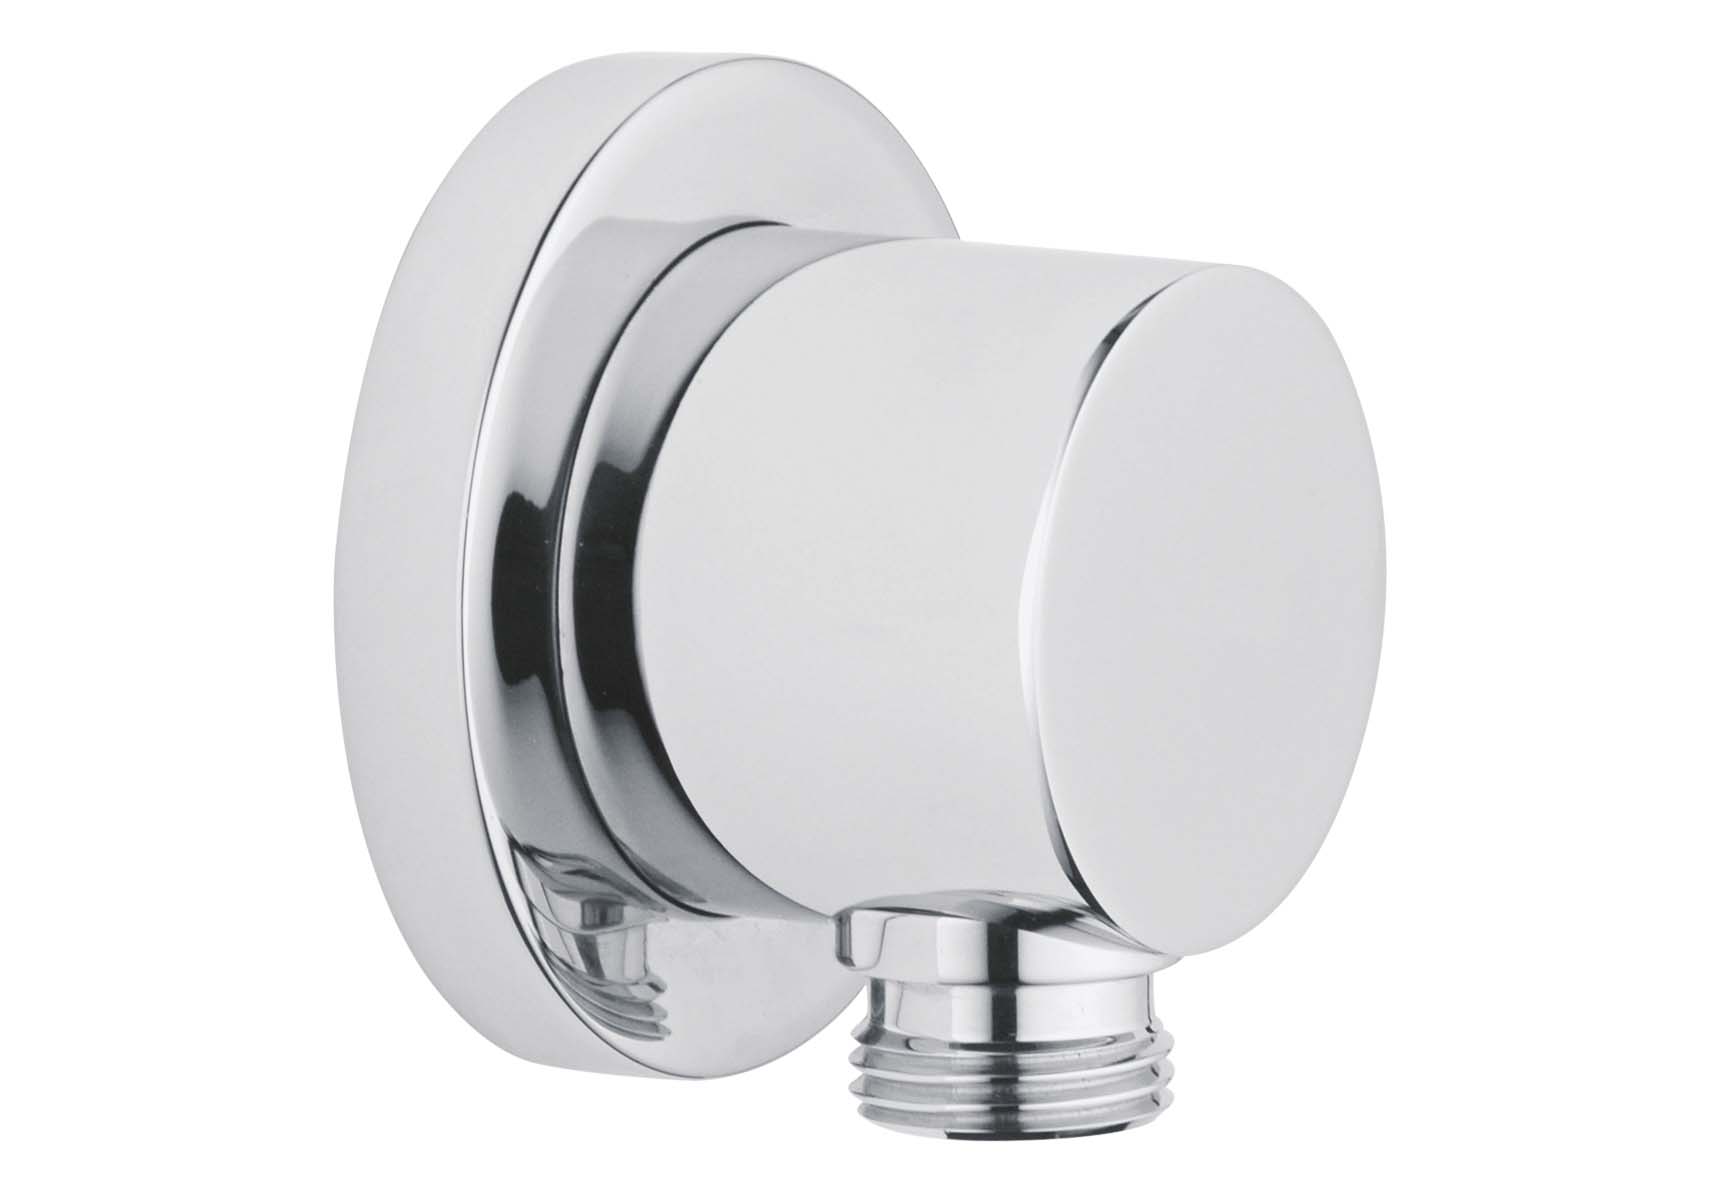 Handshower Outlet (Wall Mounted)